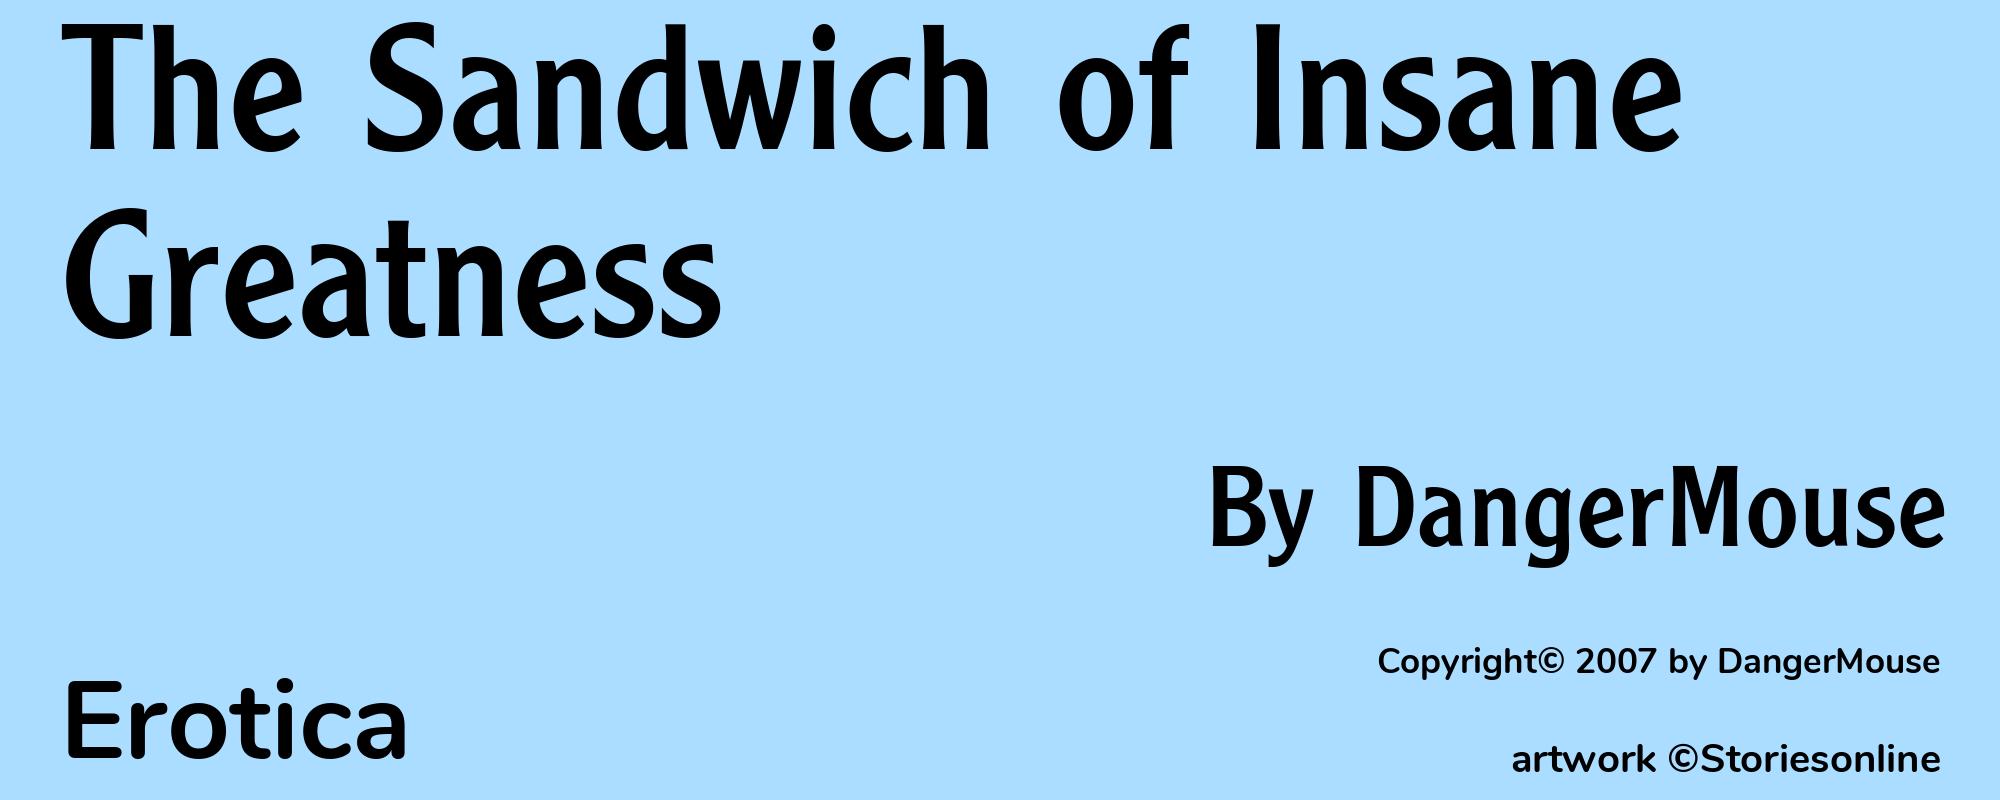 The Sandwich of Insane Greatness - Cover